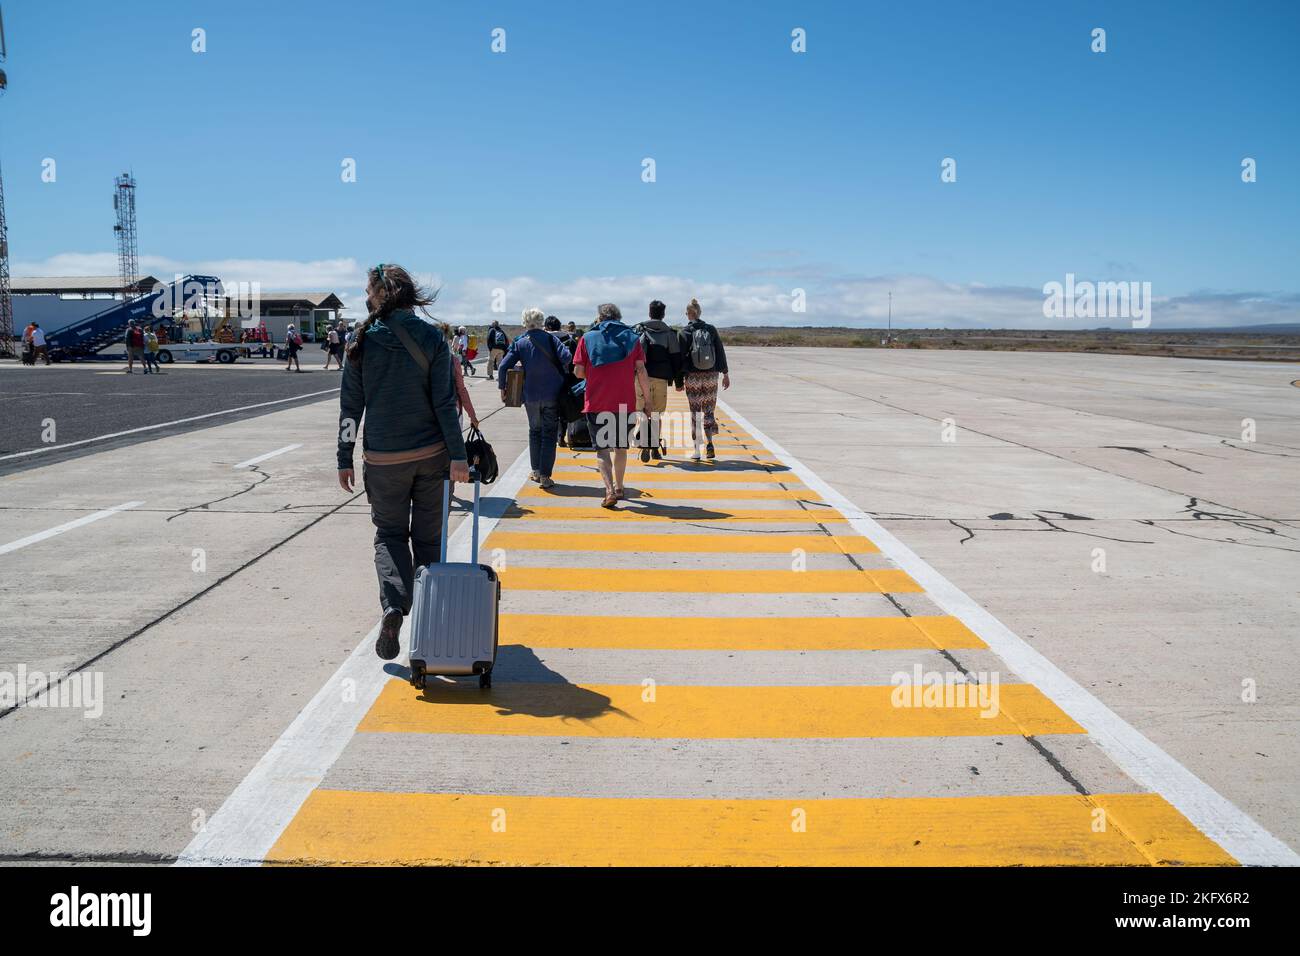 Passengers on the runway, disembarking from the plane, Seymour Airport, Galapagos Islands Stock Photo